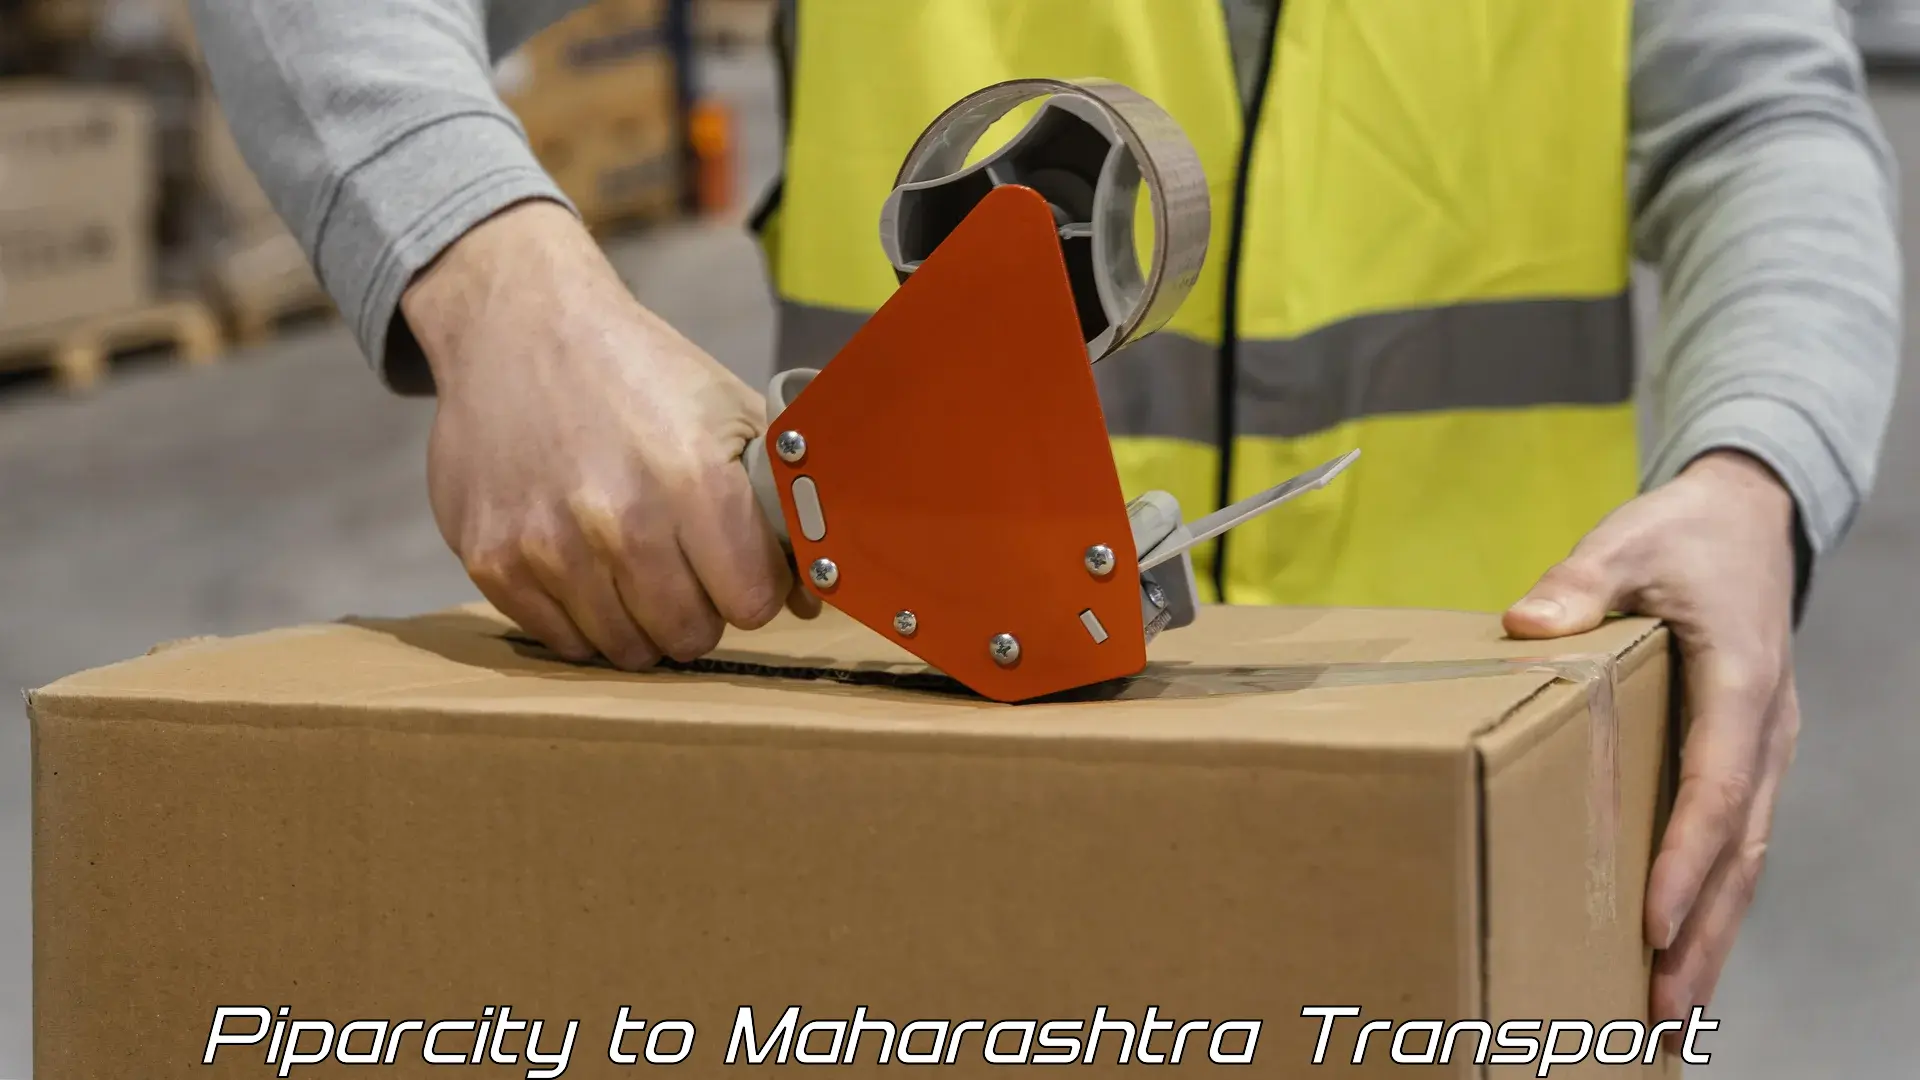 Cargo transport services Piparcity to Chembur